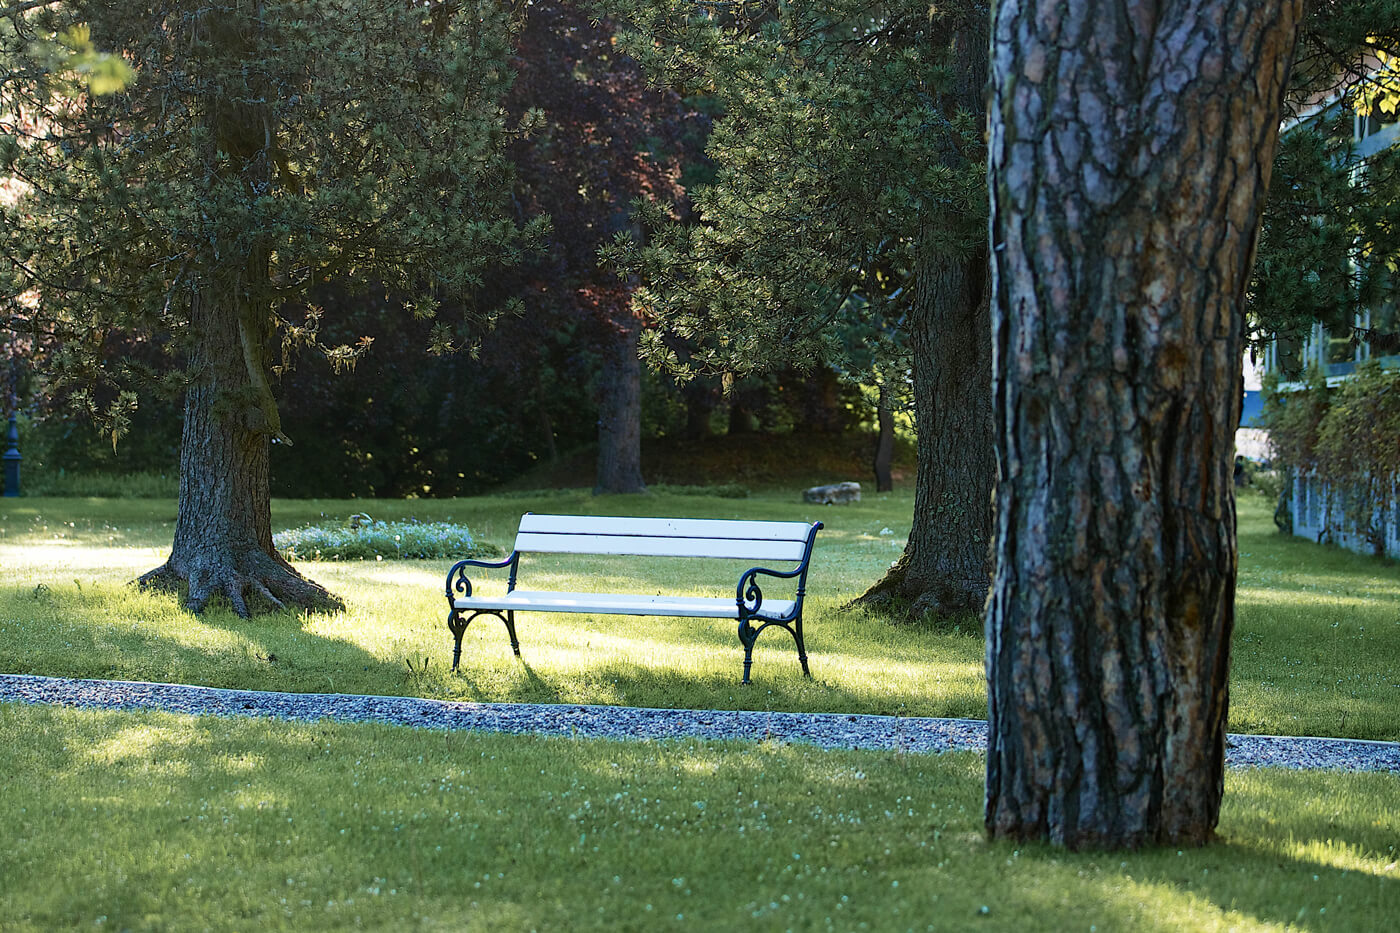 a landscape shot of a simple bench sitting under evergreen trees in a park. The grass is nicely cut and lush. There is a little rock path leading past the bench.